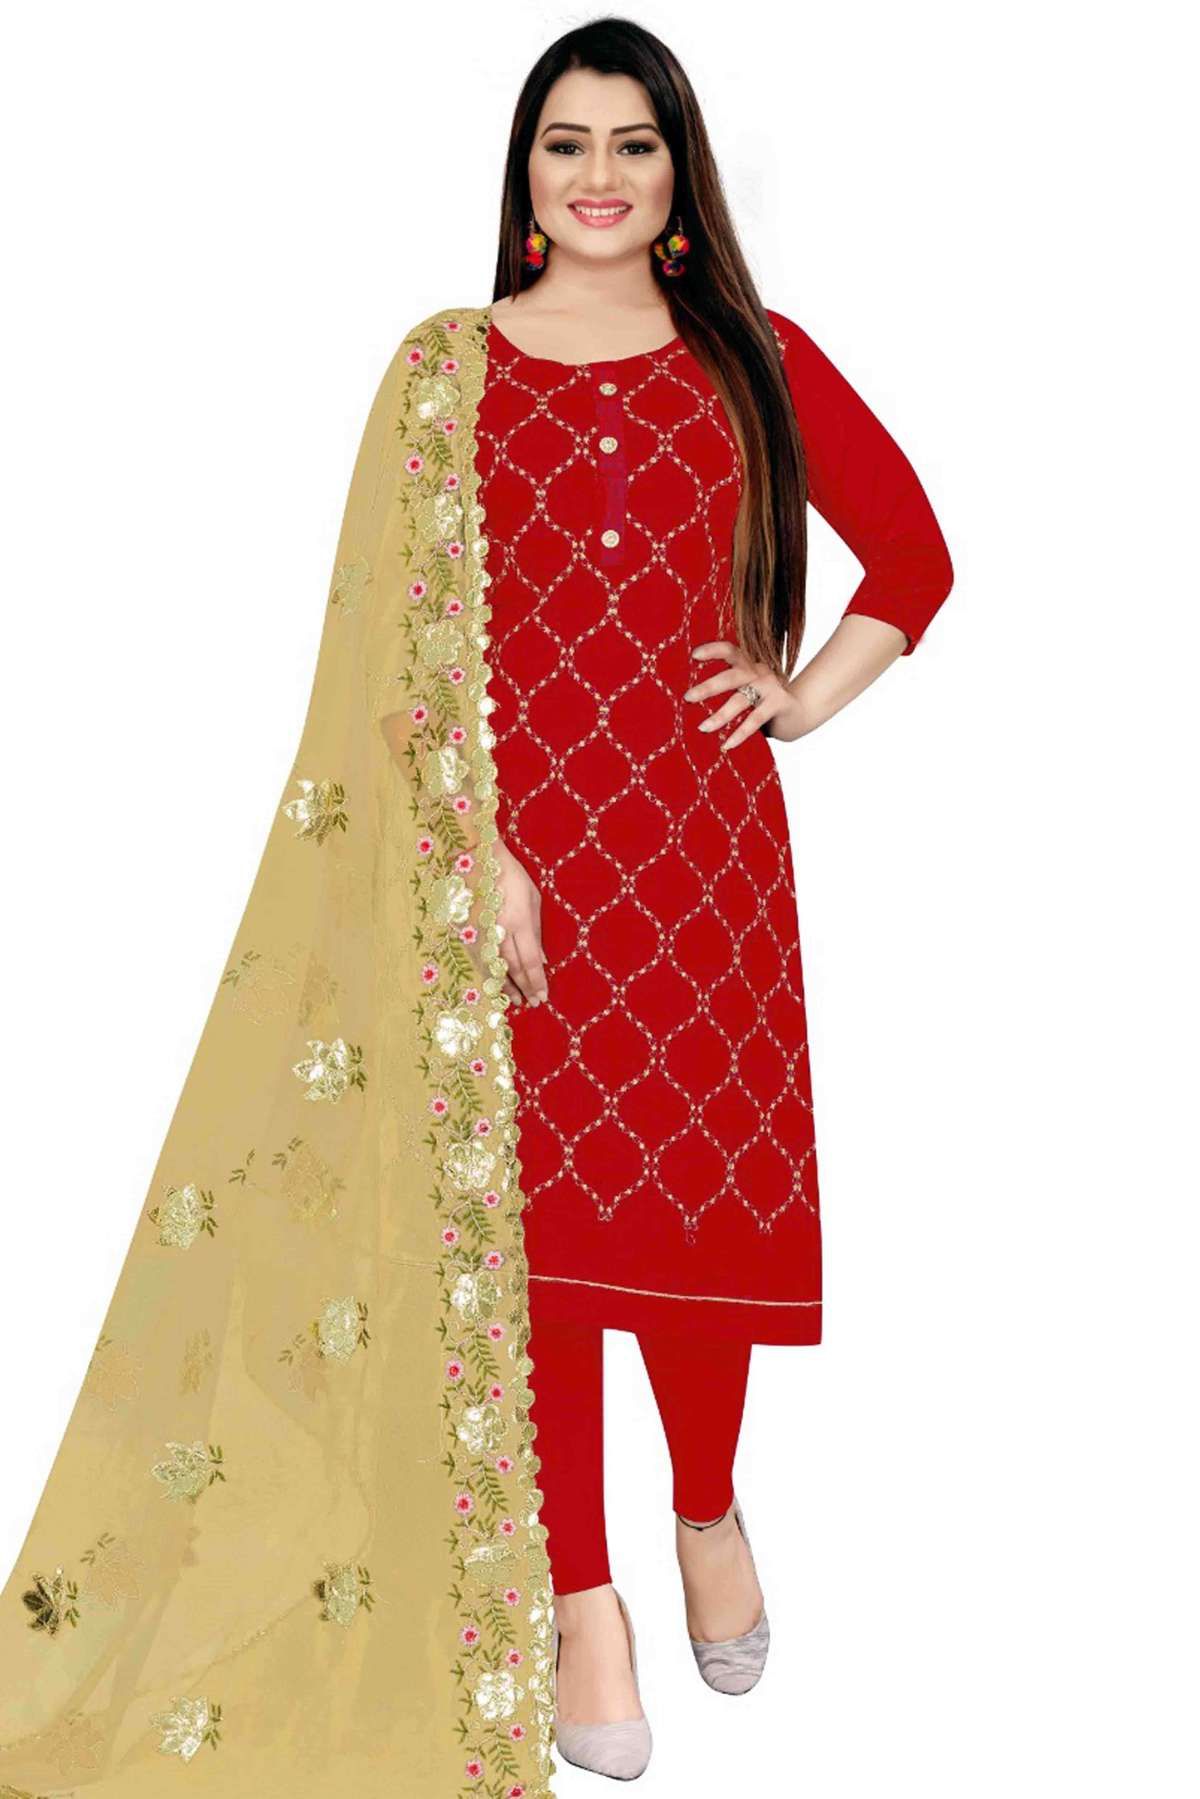 Unstitched Chanderi Embroidery Churidar Suit In Red Colour - US3234367